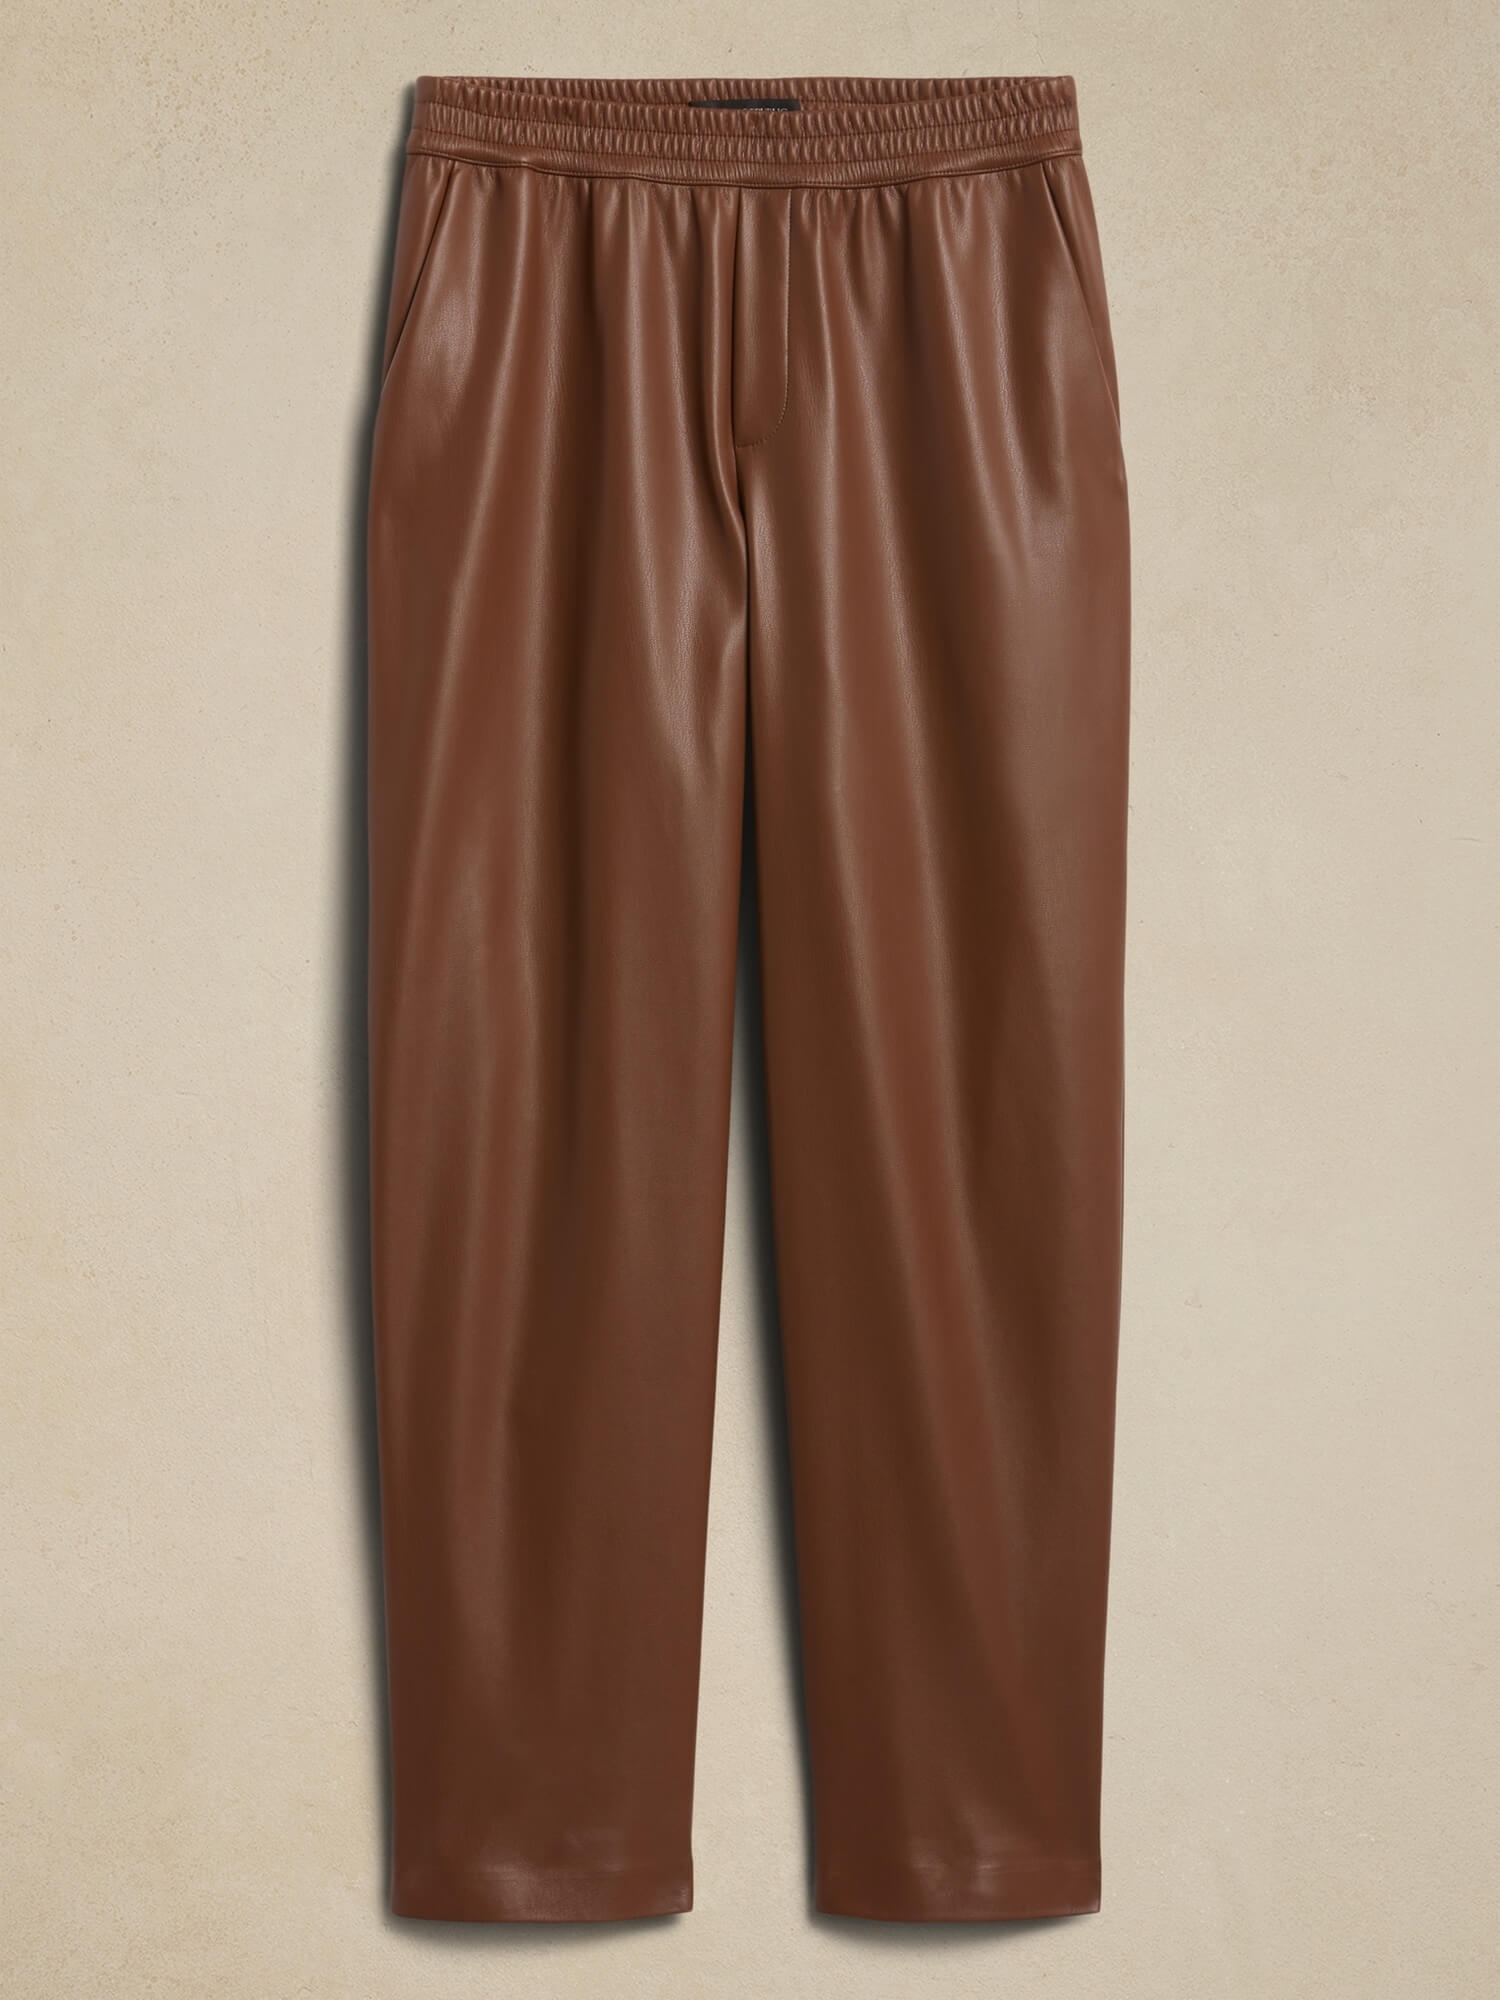 Five Things We're Loving At Banana Republic Vegan Leather Pants affordable faux leather pants faux leather pants with a classic silhouette versatile faux leather pants